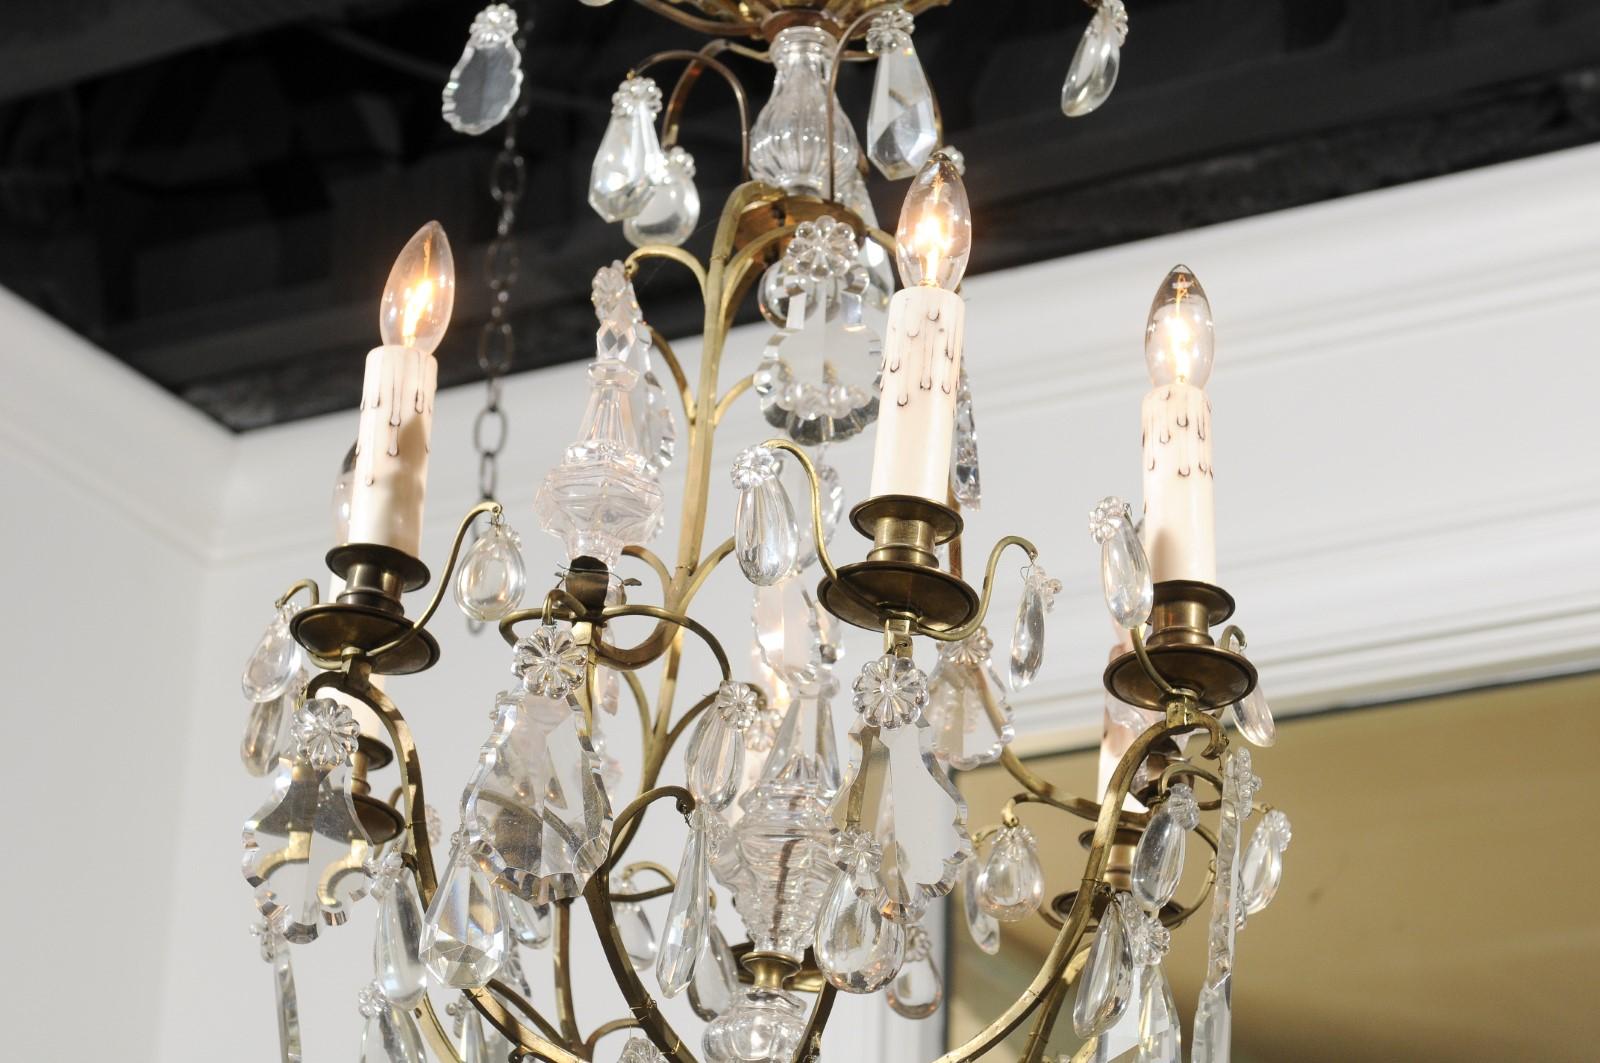 French 19th Century Six-Light Crystal Chandelier with Scrolled Brass Armature For Sale 6